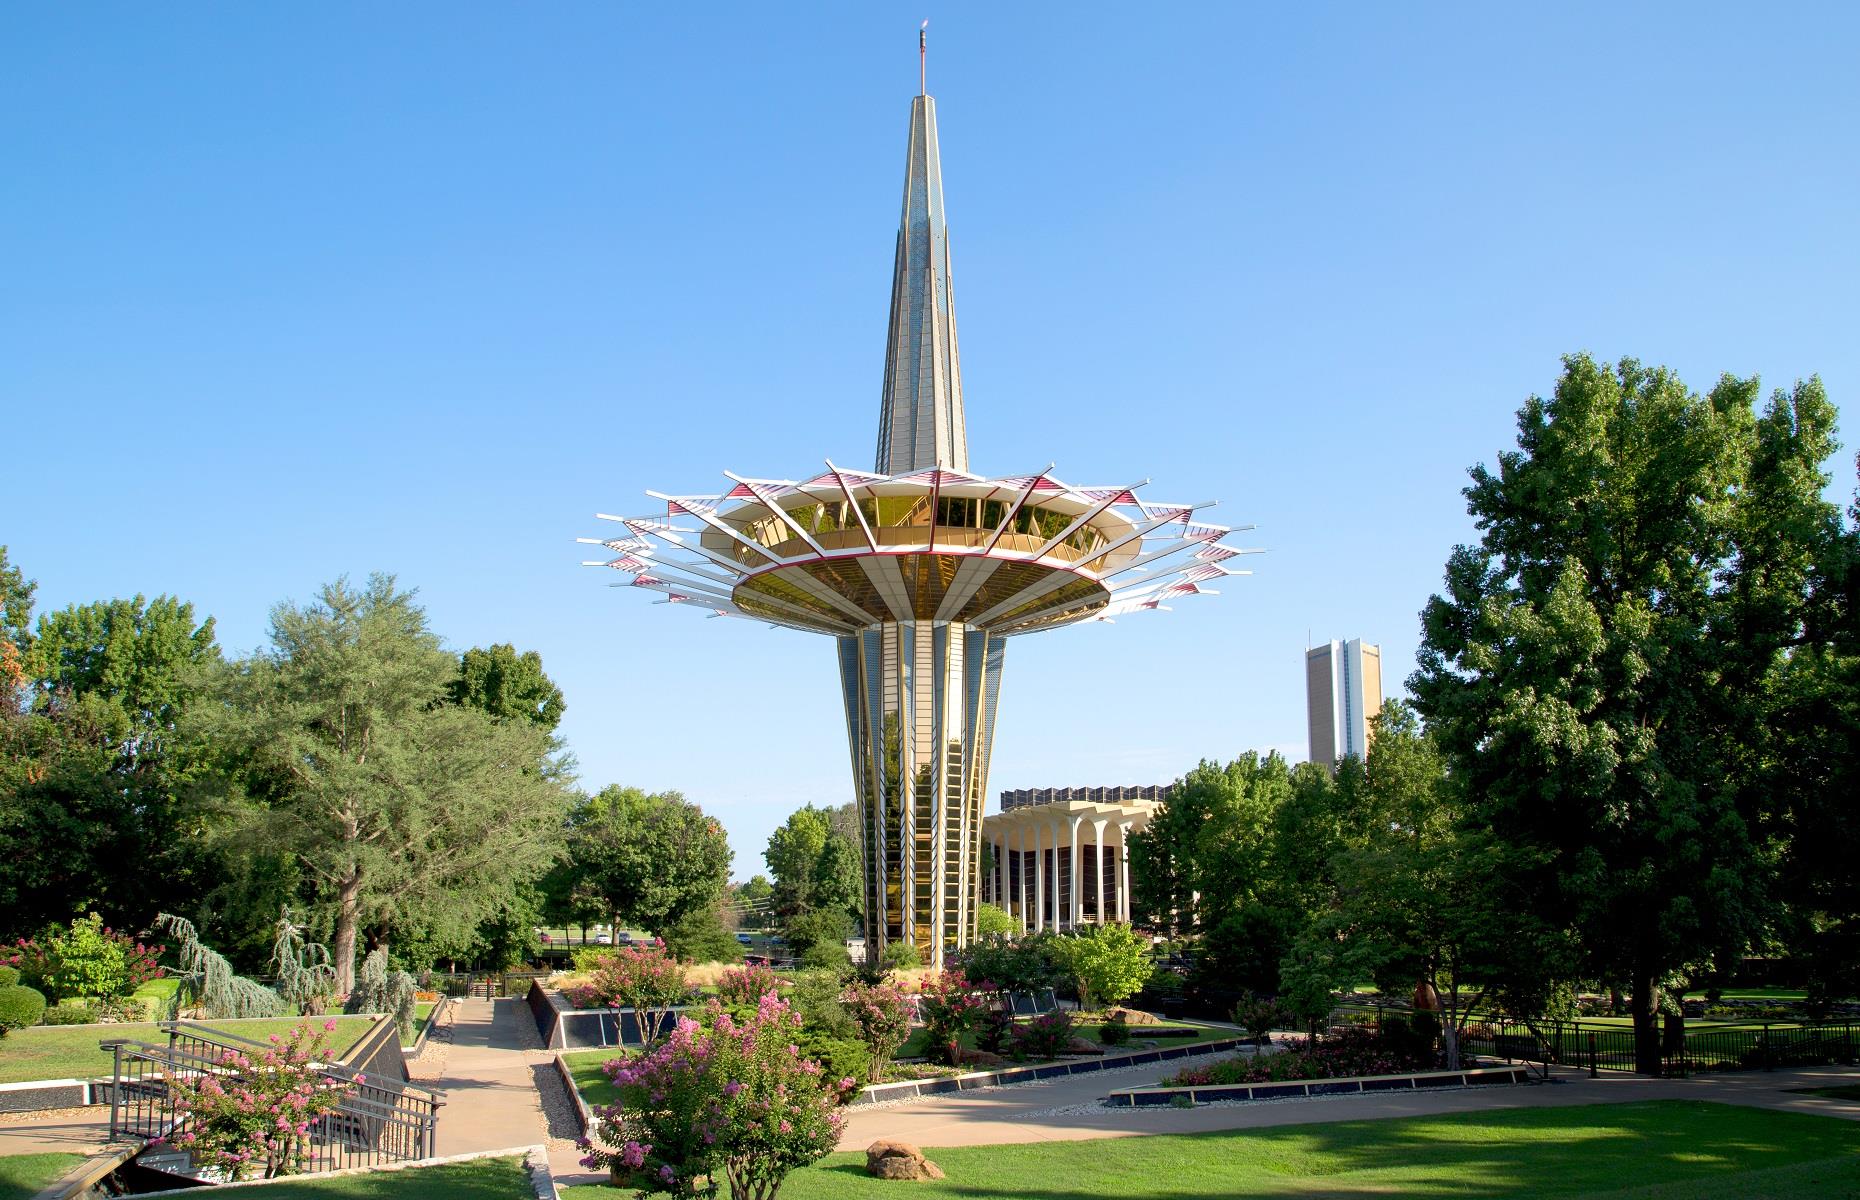 <p>Oral Roberts University has one of the most unique campuses in the world. Founded in 1963 in Tulsa, Oklahoma, the modern evangelical university is home to a vast array of futuristic, Art Deco-inspired buildings, each of which symbolises an element of the Christian faith. As well as the ultra-modern student centre, the campus is also home to a striking statue known as the Prayer Hands (exactly what it sounds like) and a 200-foot-tall (61m) Prayer Tower (pictured). Prospective students can take <a href="https://oru.edu/campus-visitation/index.php">guided or self-guided campus tours</a>, with the chance to stay overnight in the dorms.</p>